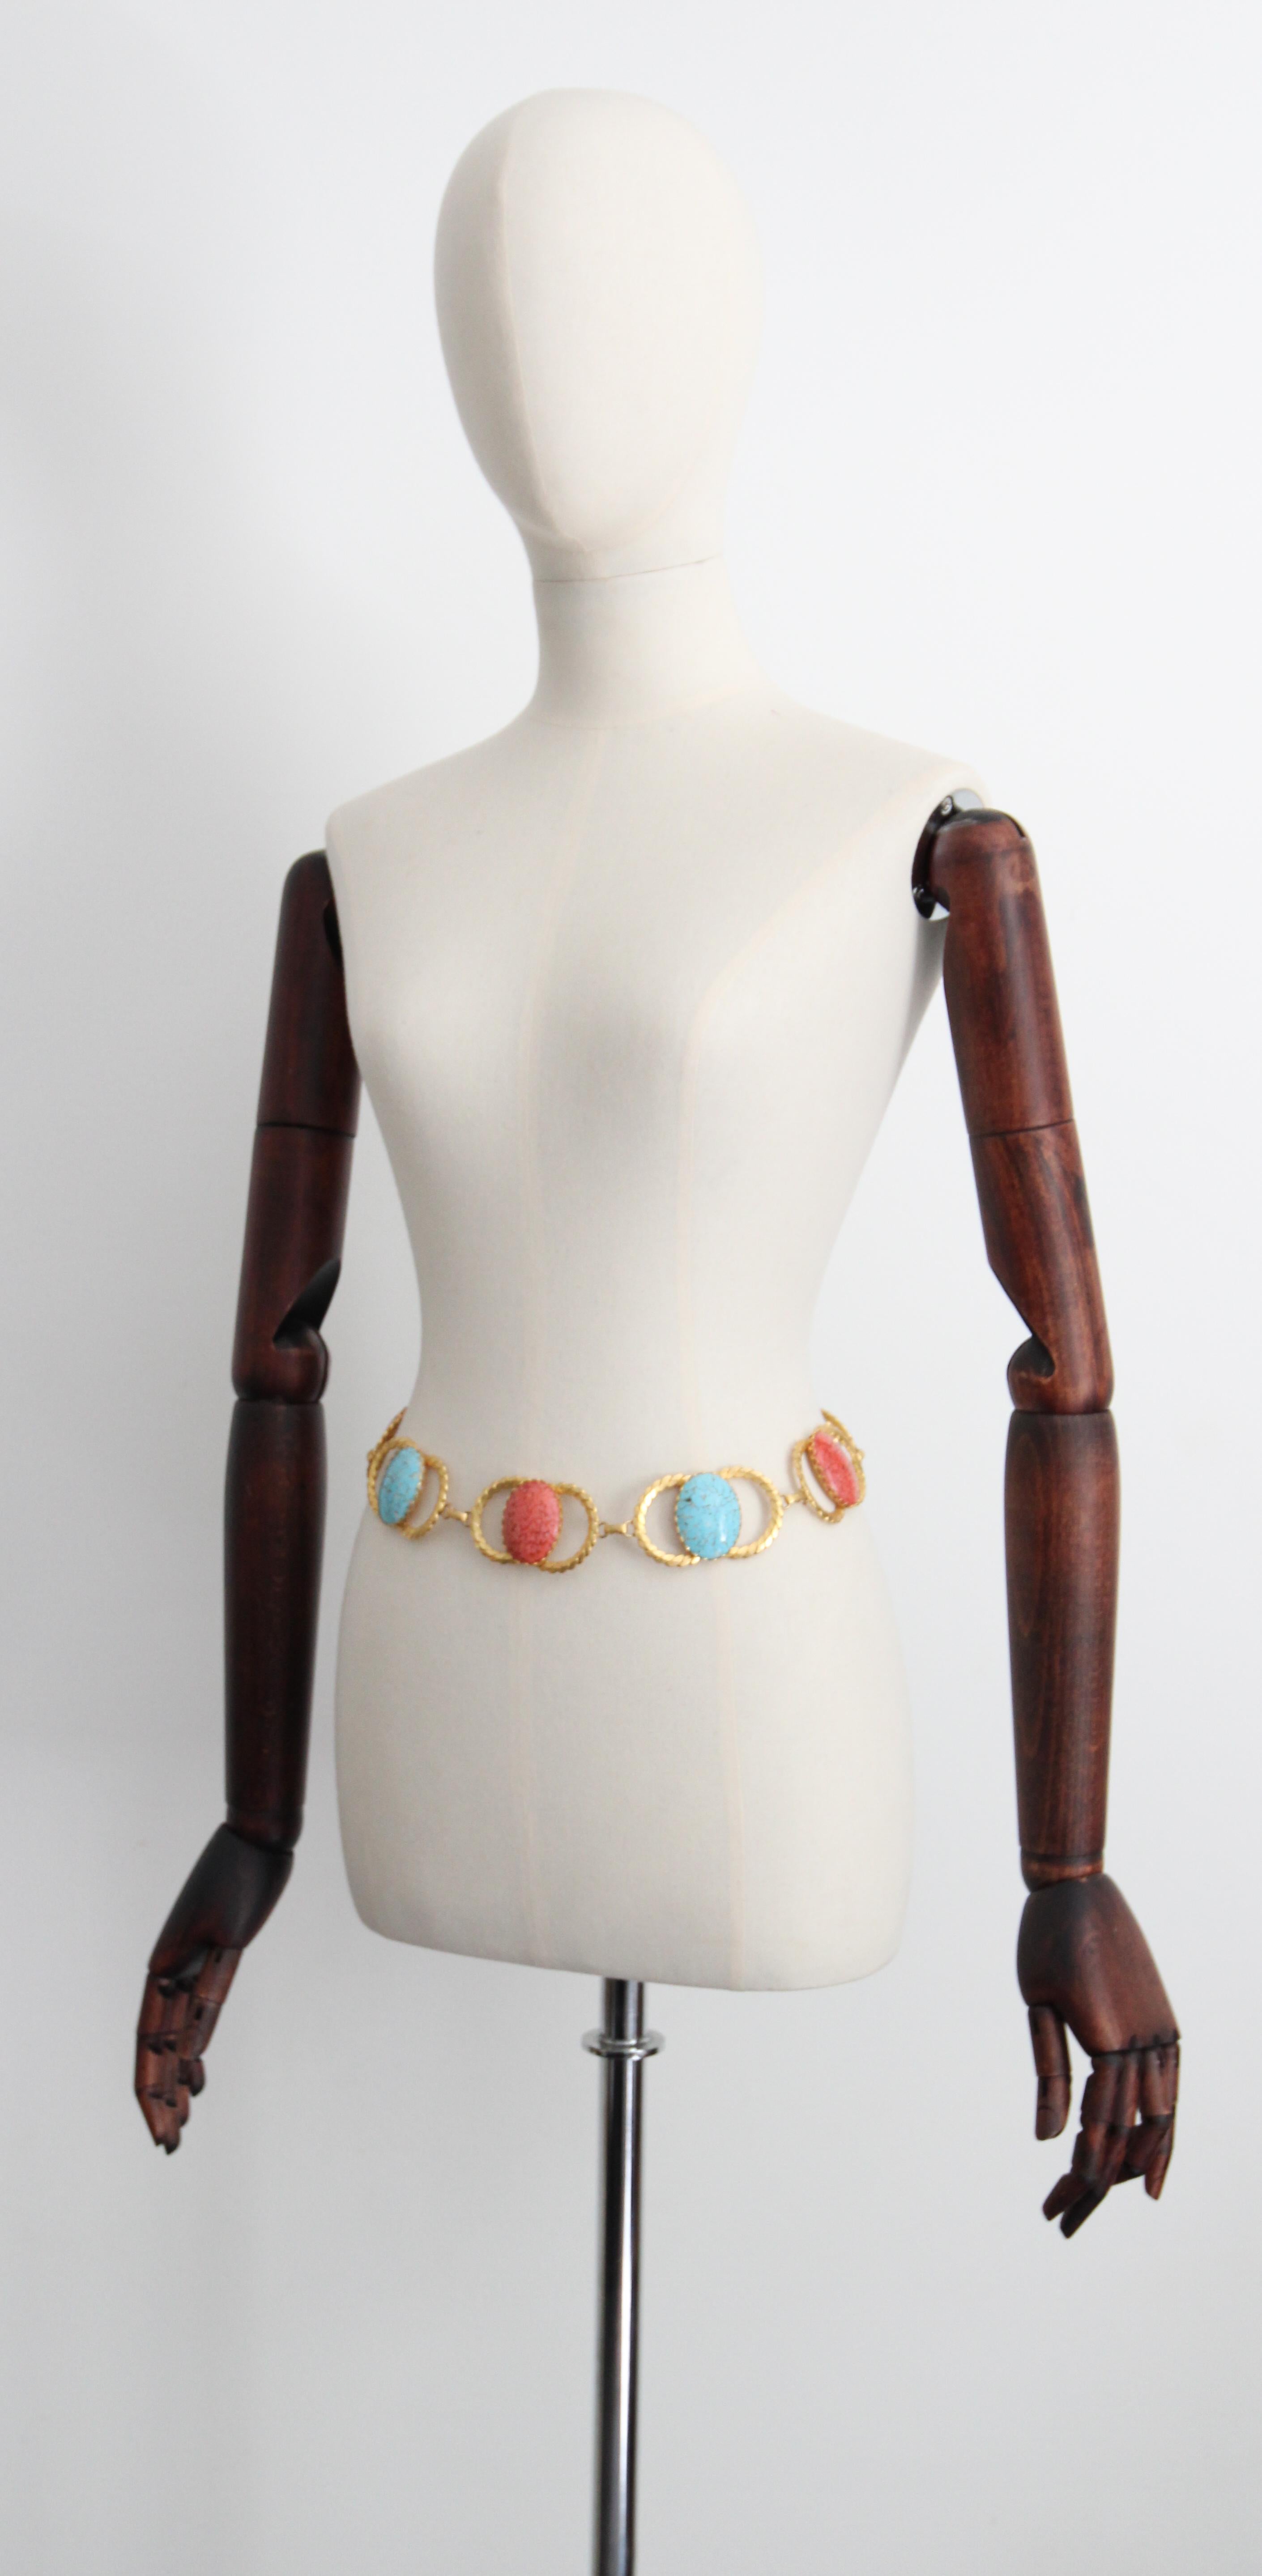 Vintage 1970's coral and turquoise glass cabochons waist chain belt UK 8 US 4 For Sale 4